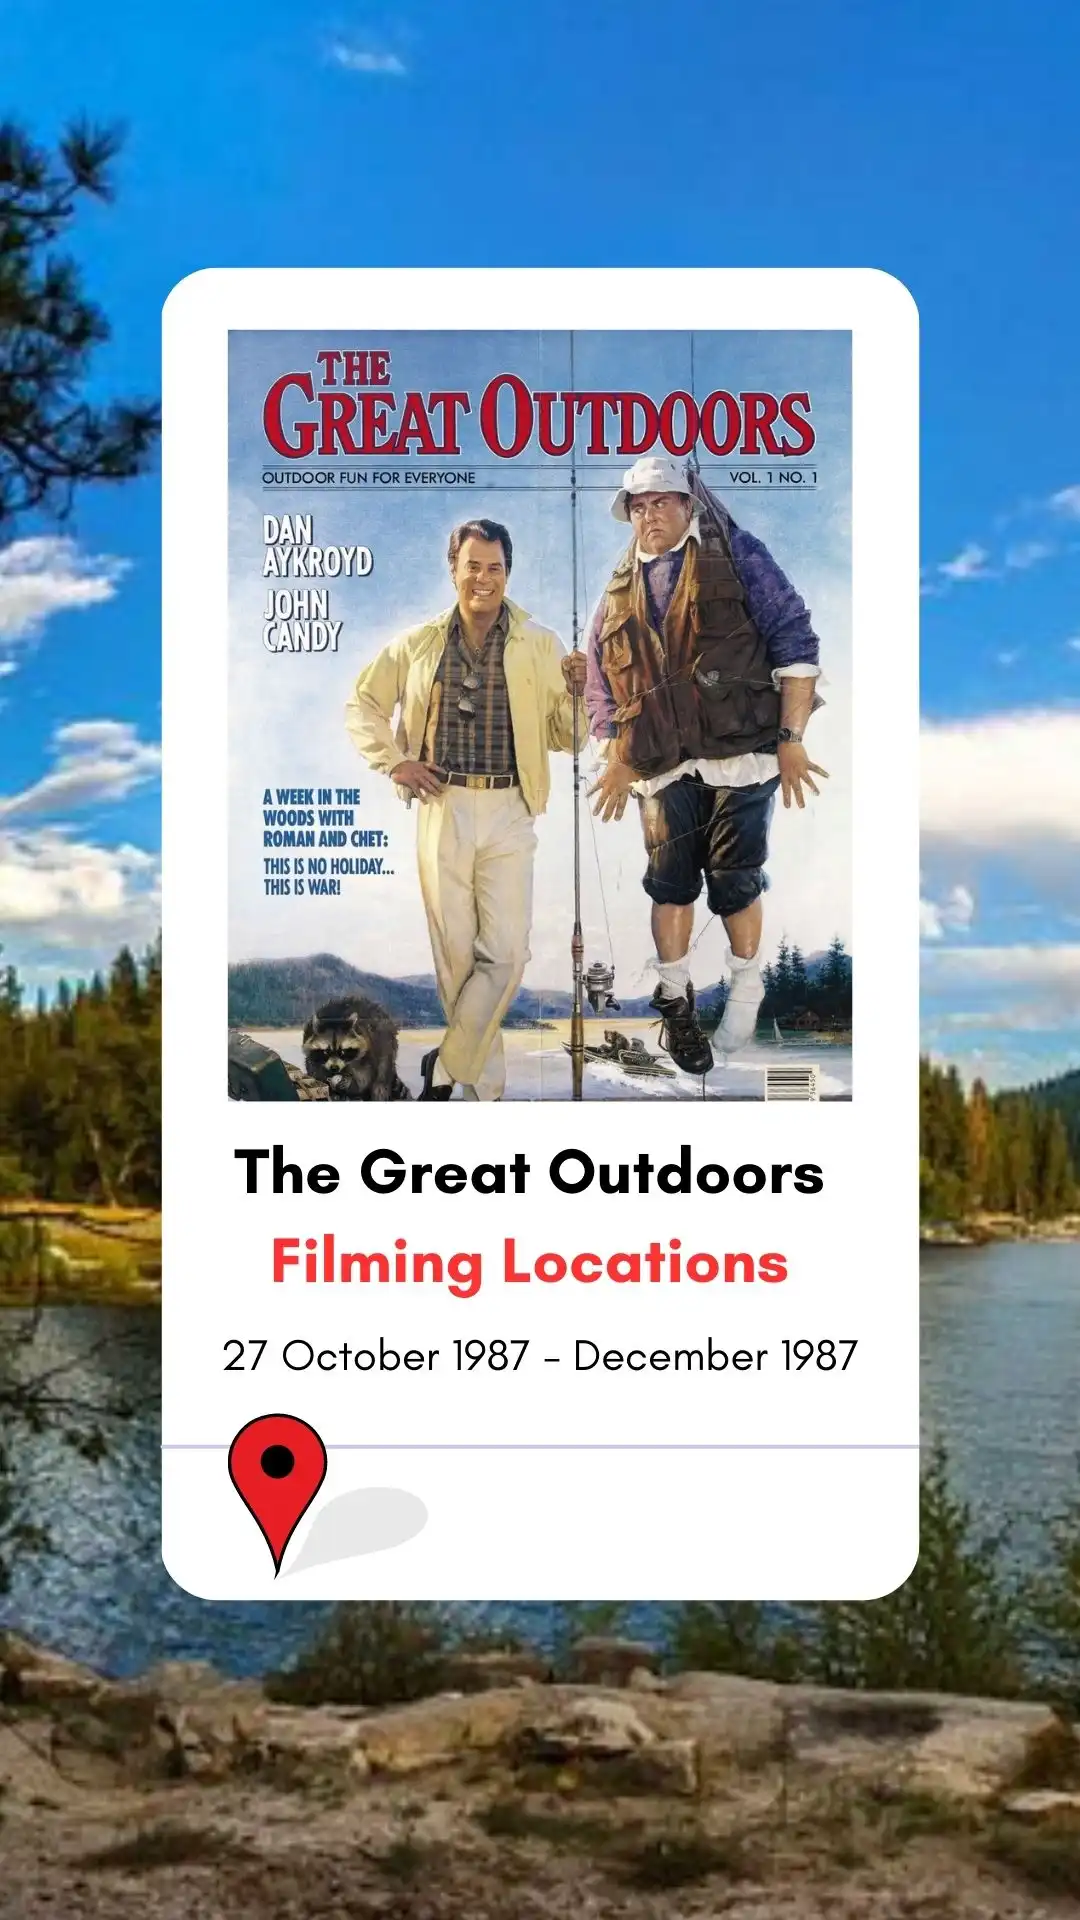 The Great Outdoors Filming Locations